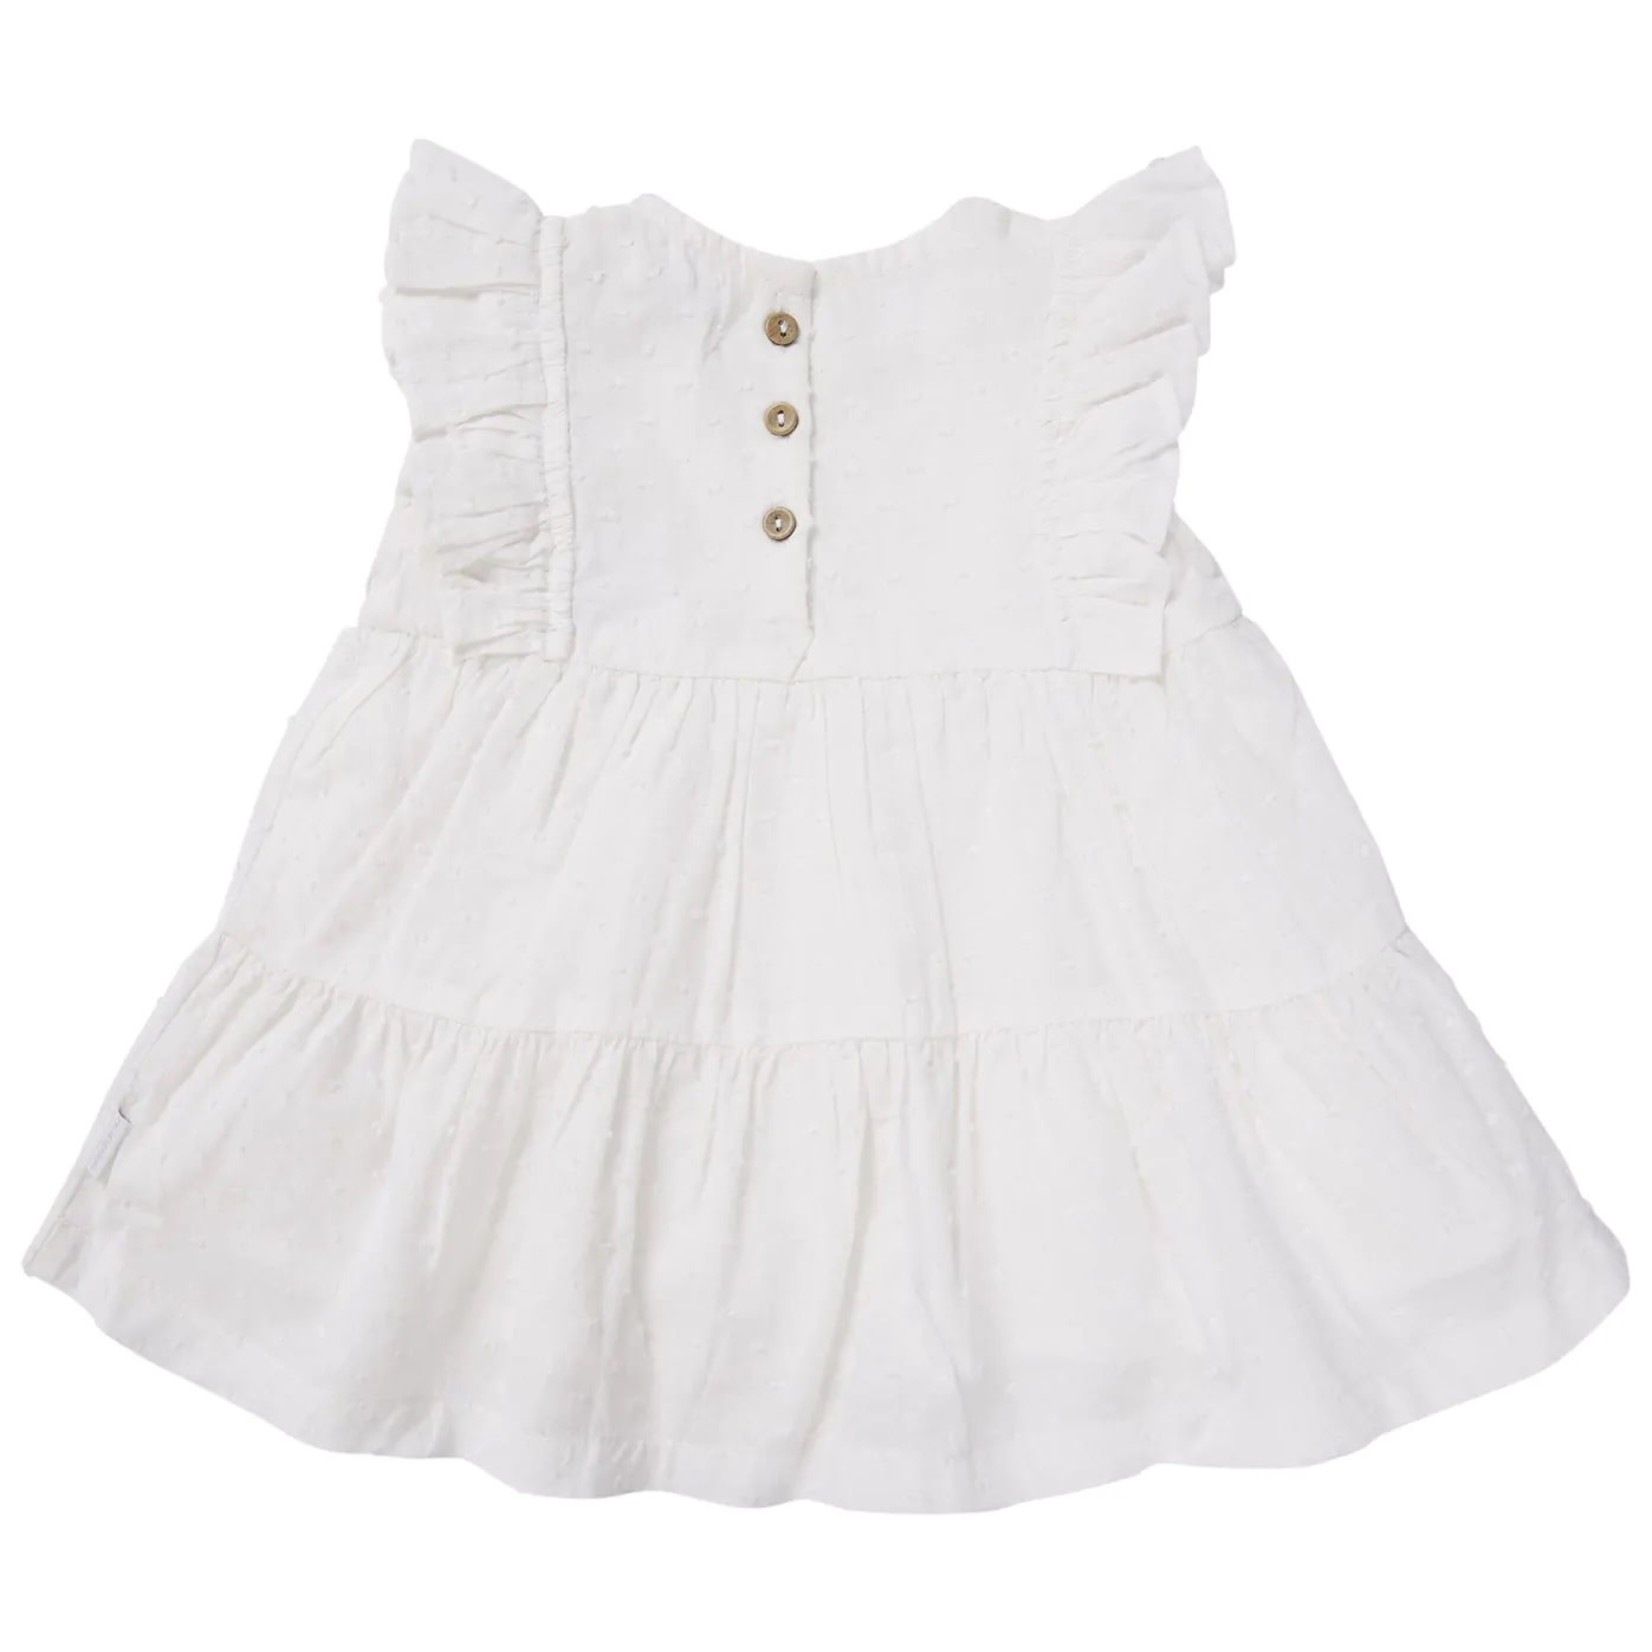 Noppies NOPPIES - White dress with textured fabric and frills at shoulders